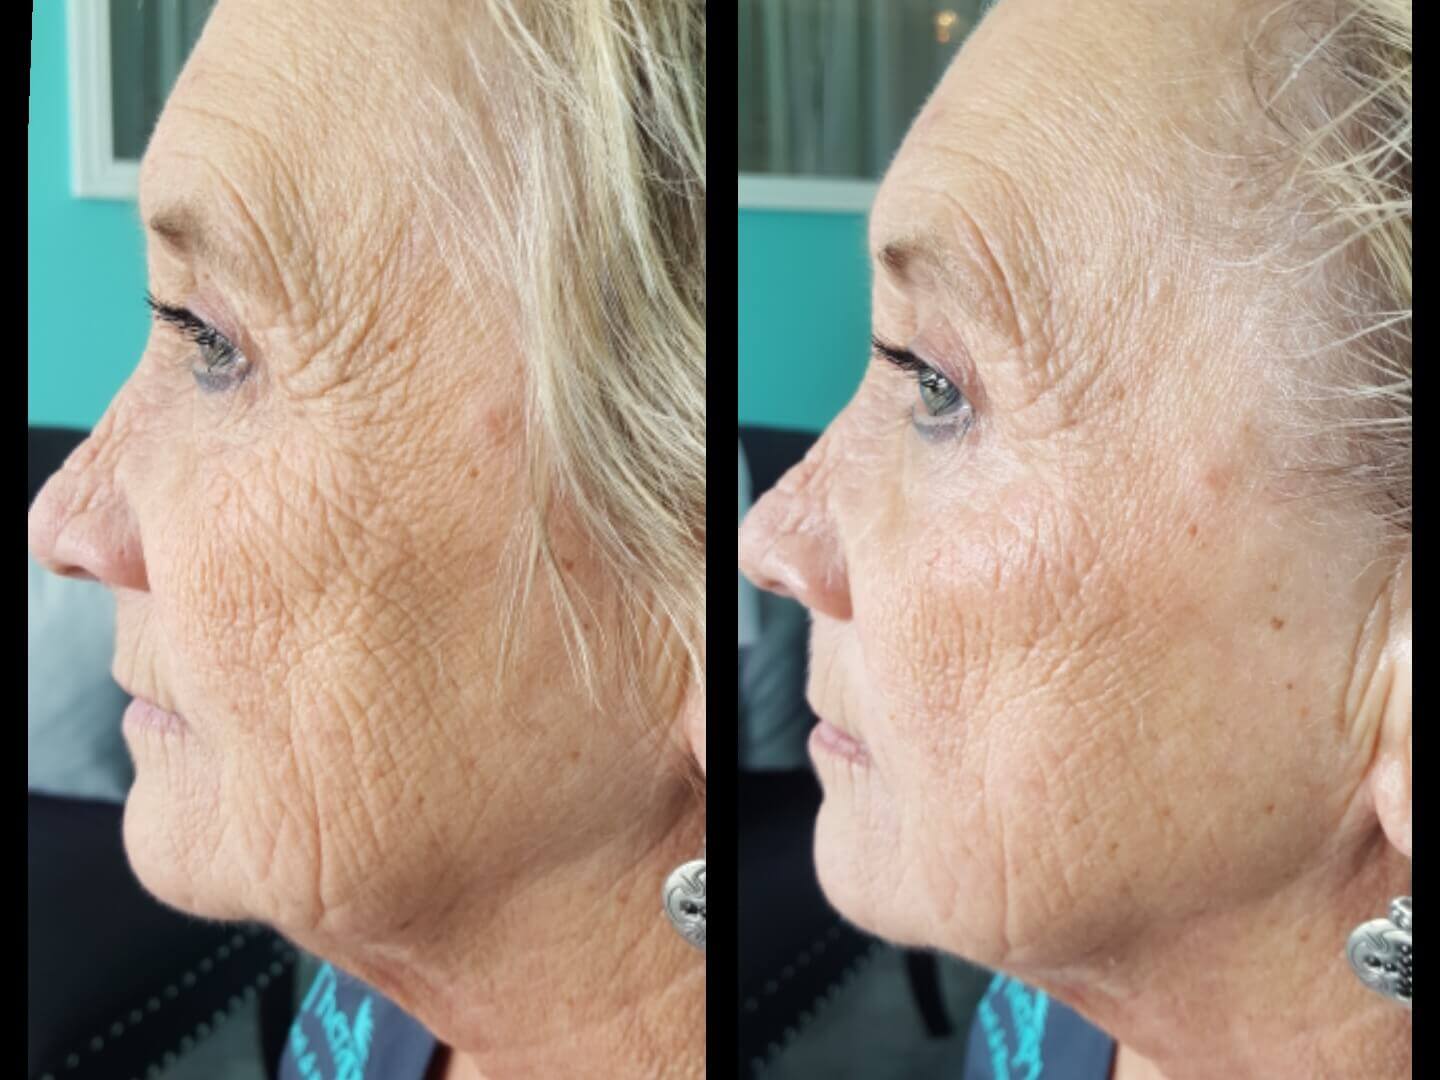 Before and after wrinkles